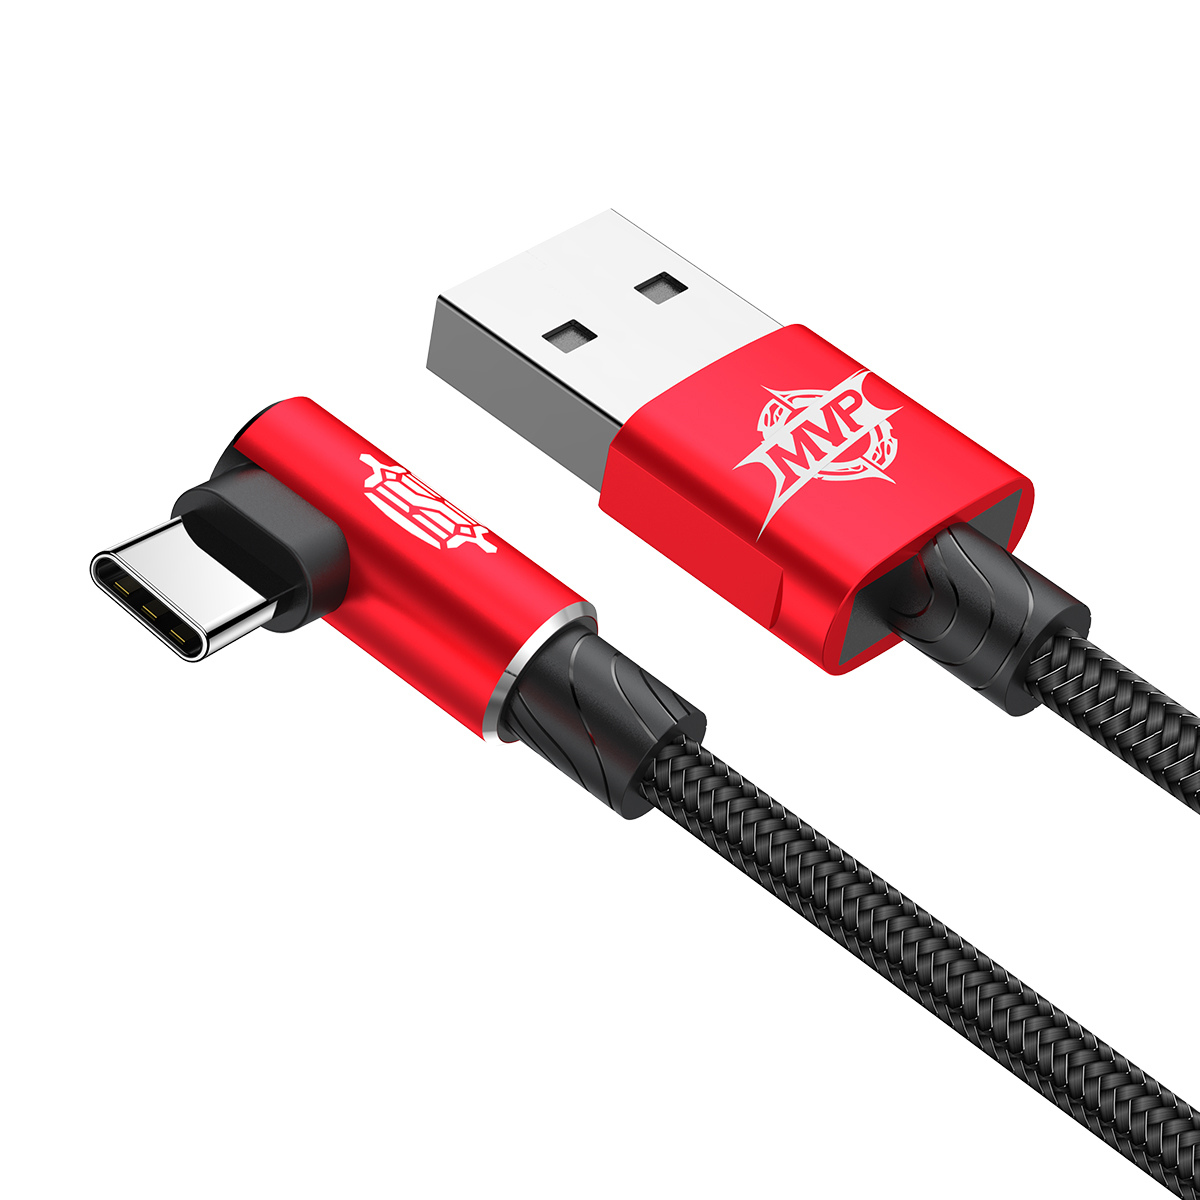 Baseus MVP Elbow Type Cable USB For Type-C 2A 1M Red